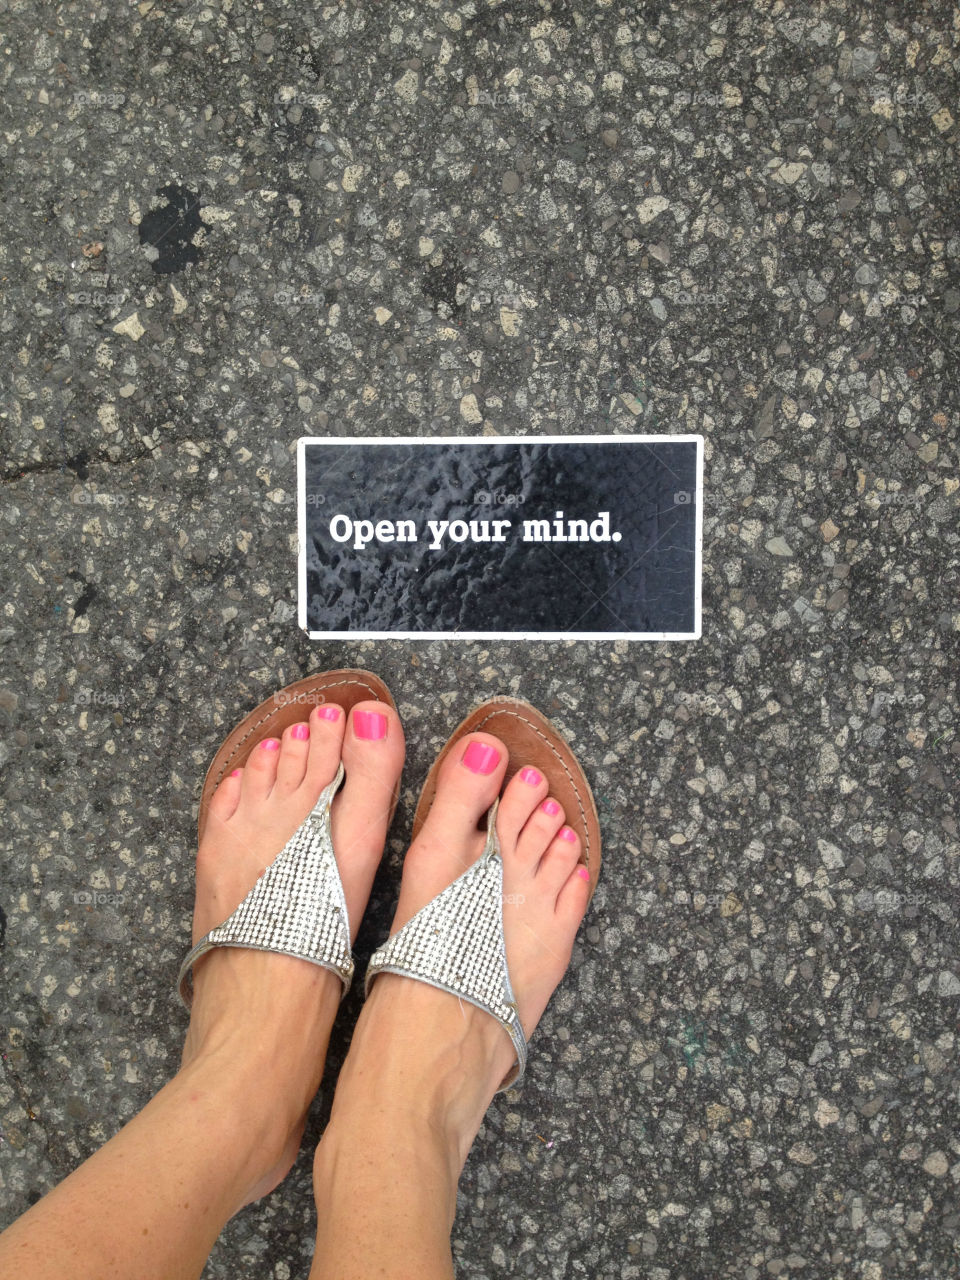 Open Your Mind Sticker on the Ground